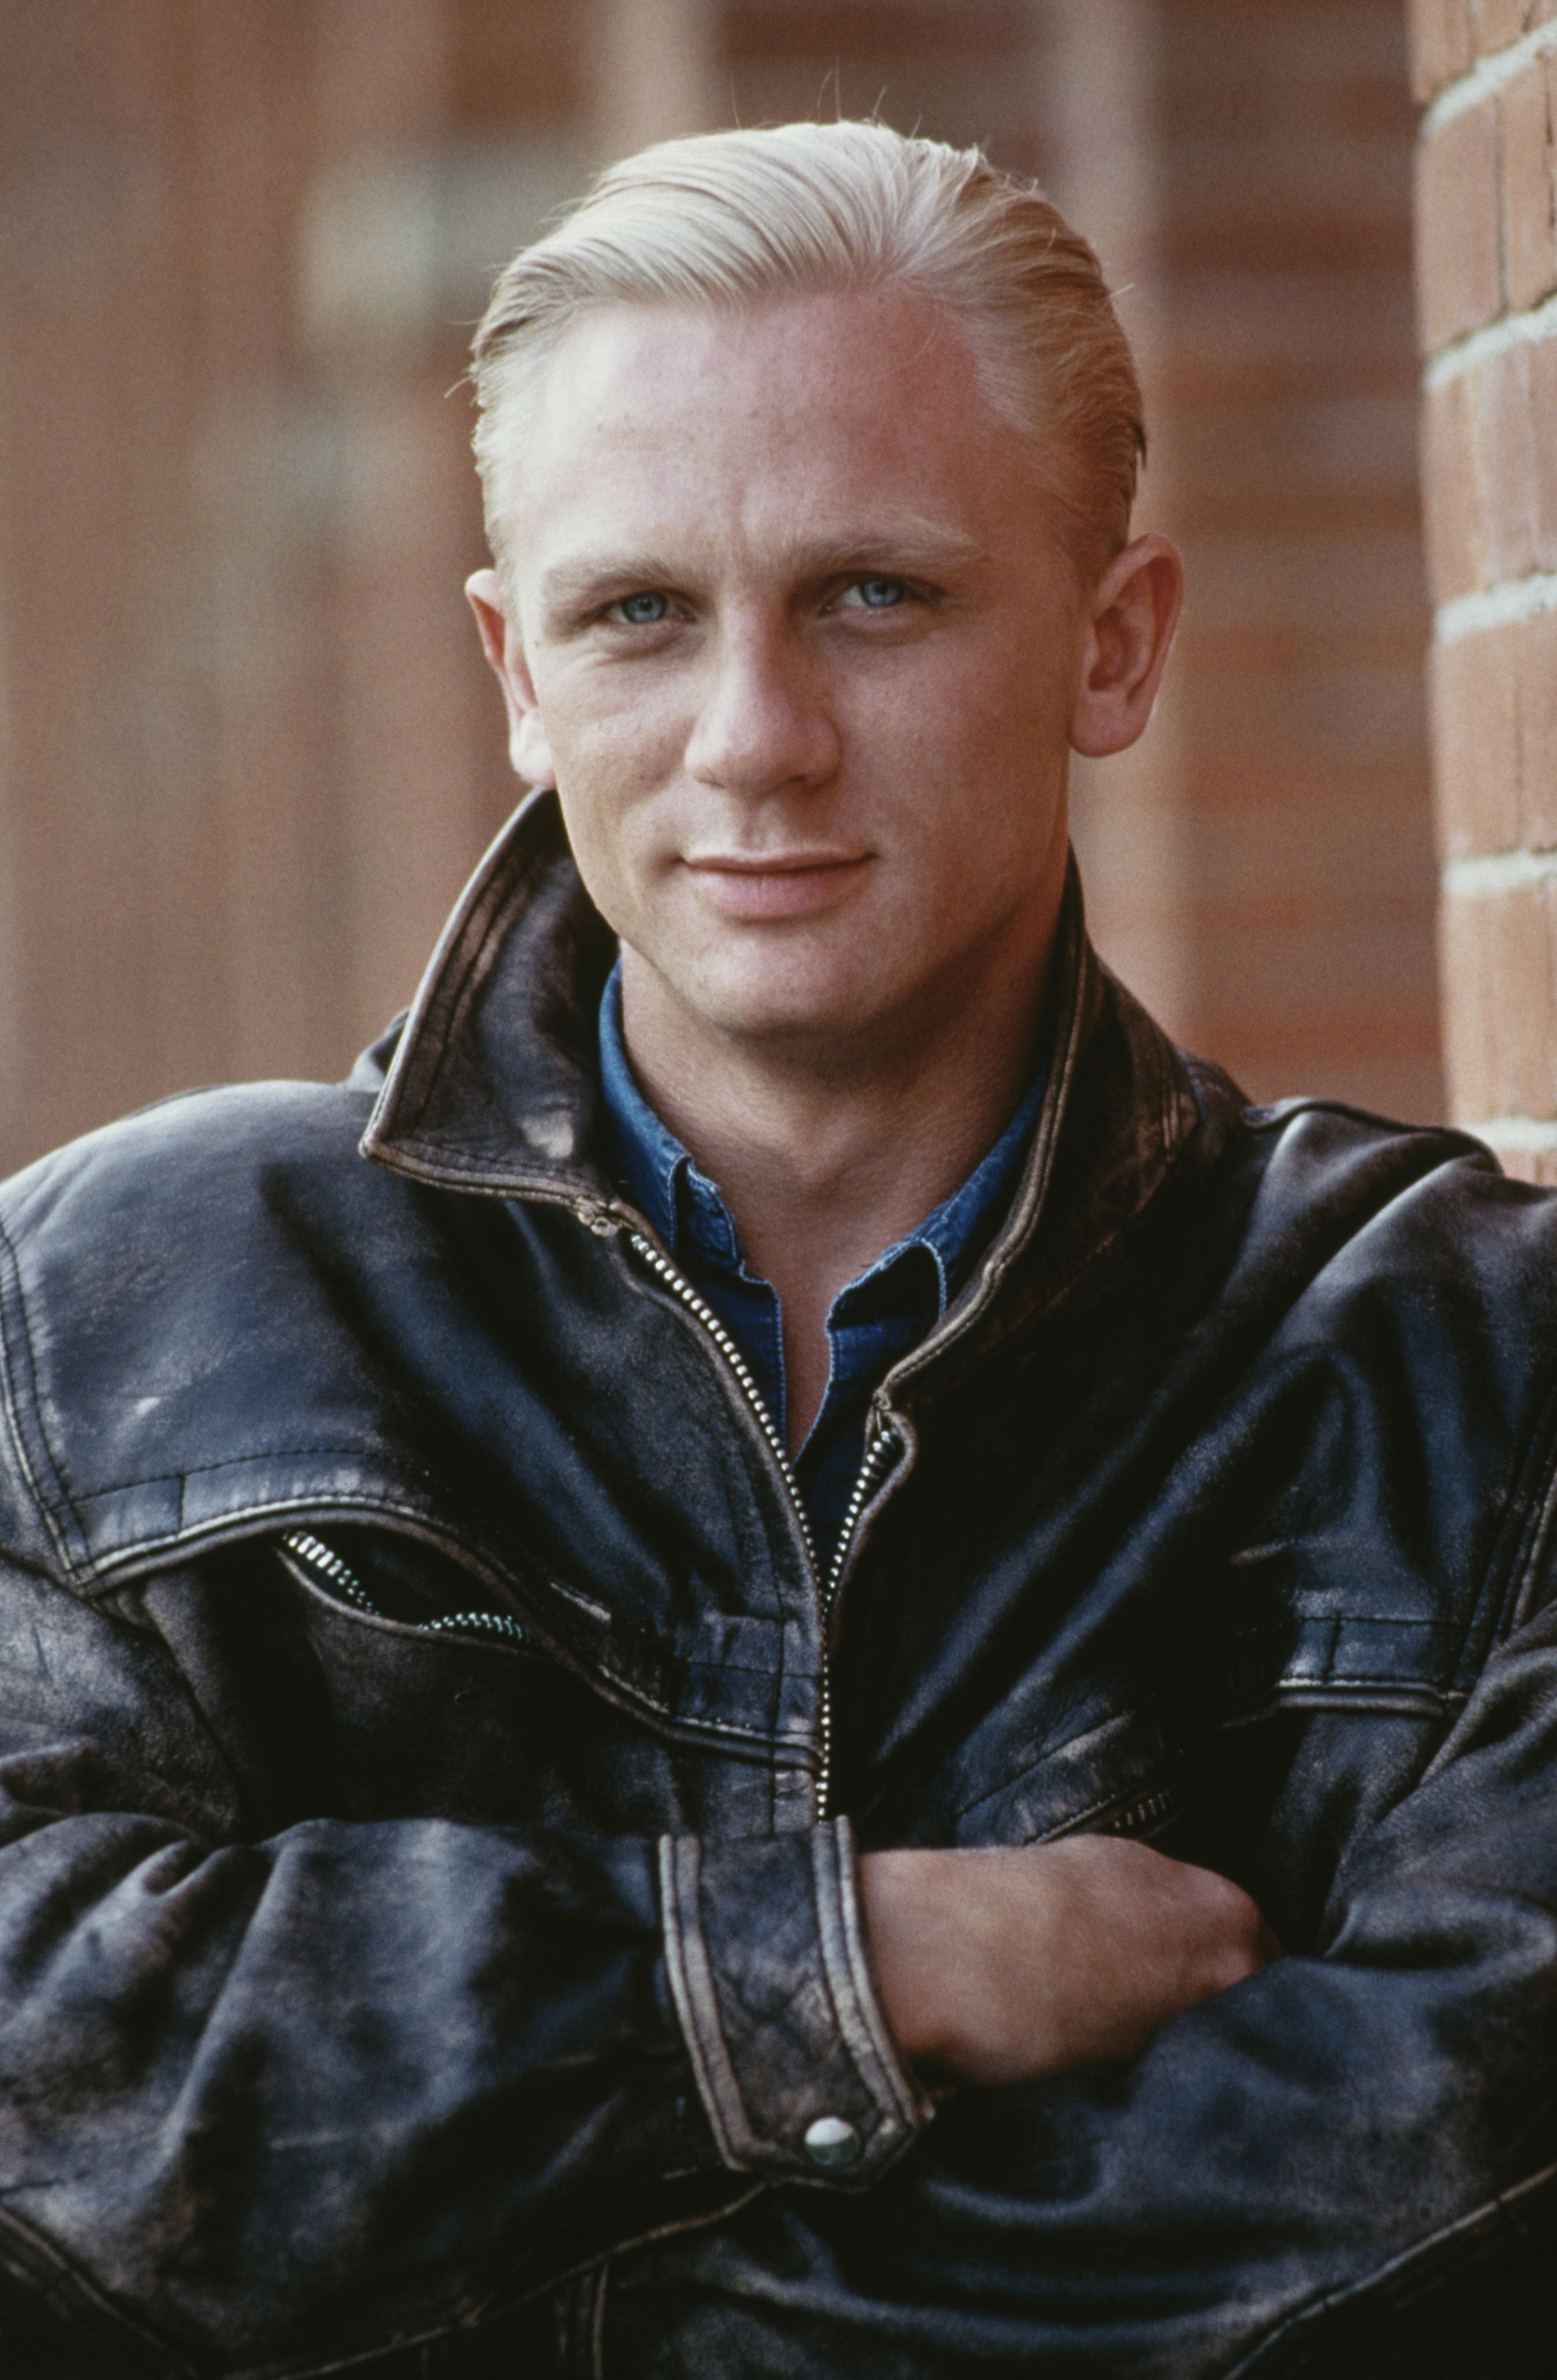 <p><a href="https://www.wonderwall.com/celebrity/profiles/overview/daniel-craig-267.article">Daniel Craig</a> is seen here in 1992 -- the same year he married his first wife, Scottish actress Fiona Loudon, and welcomed daughter Ella Loudon. (He and Fiona split two years later.) Keep reading to see his look-alike model-actress daughter as an adult...</p>